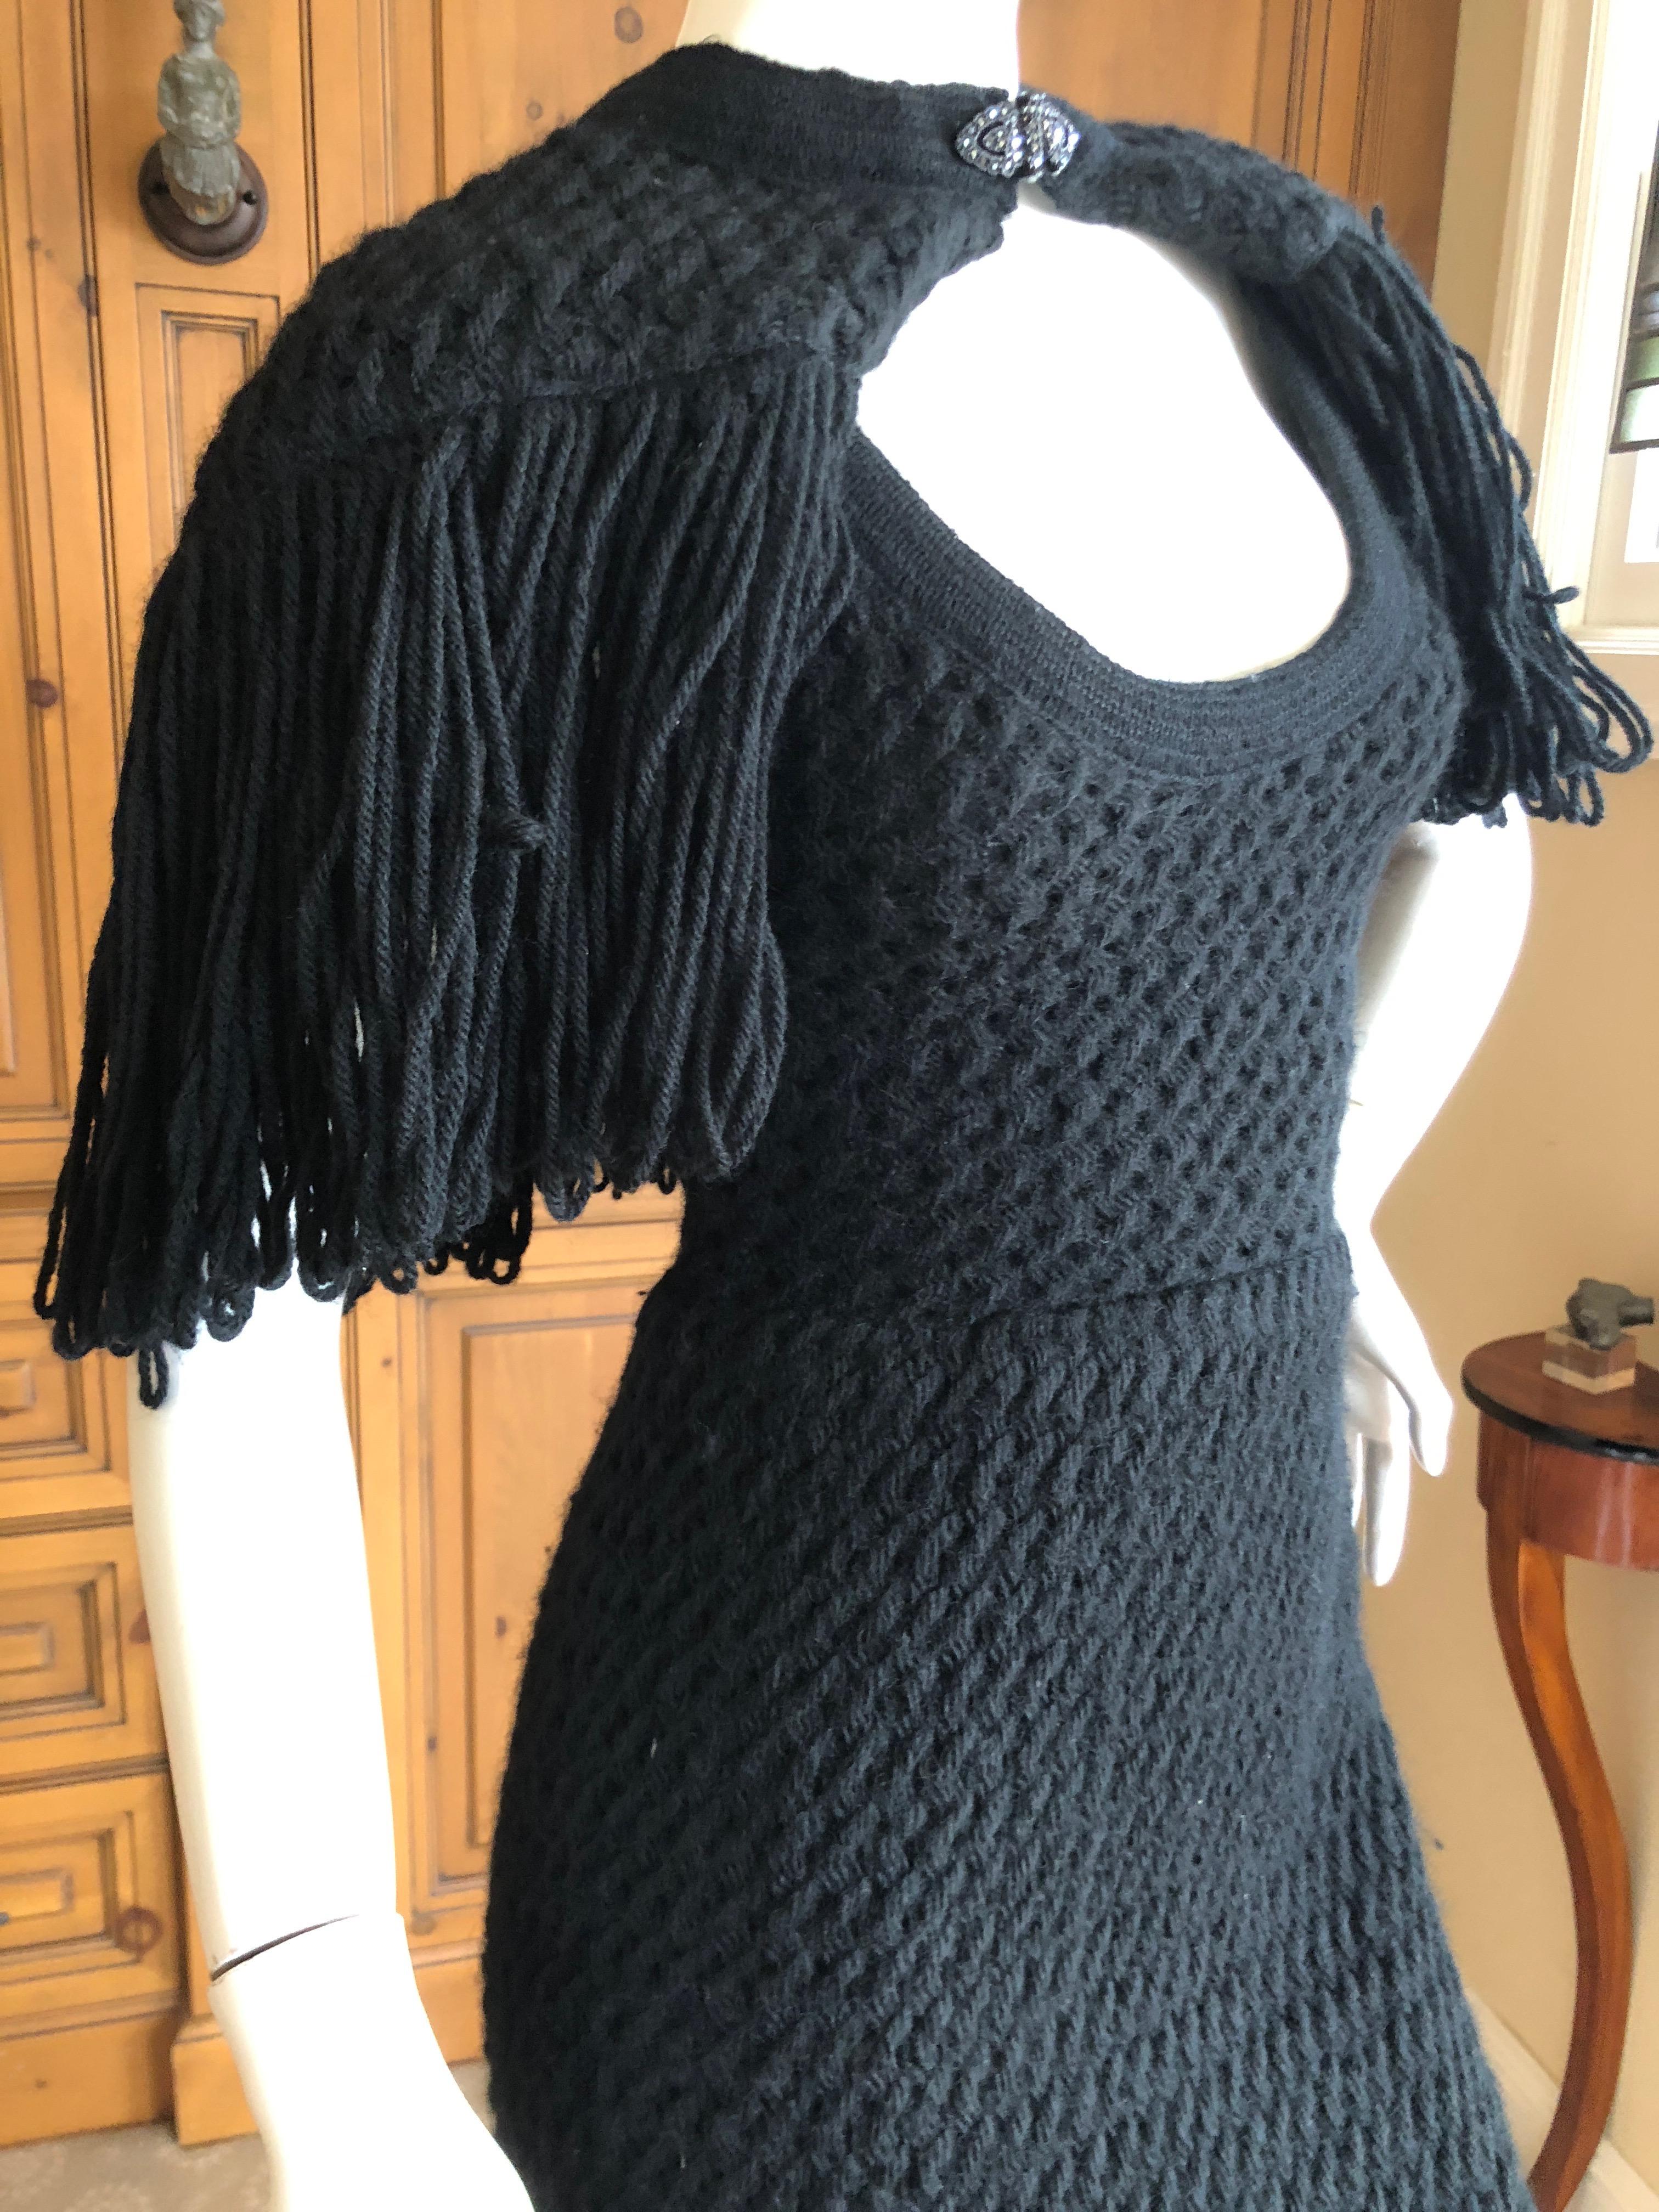 Cardinali Black Silk Lined Crochet Dress with Matching Fringed Shawl Fall 1971  For Sale 6